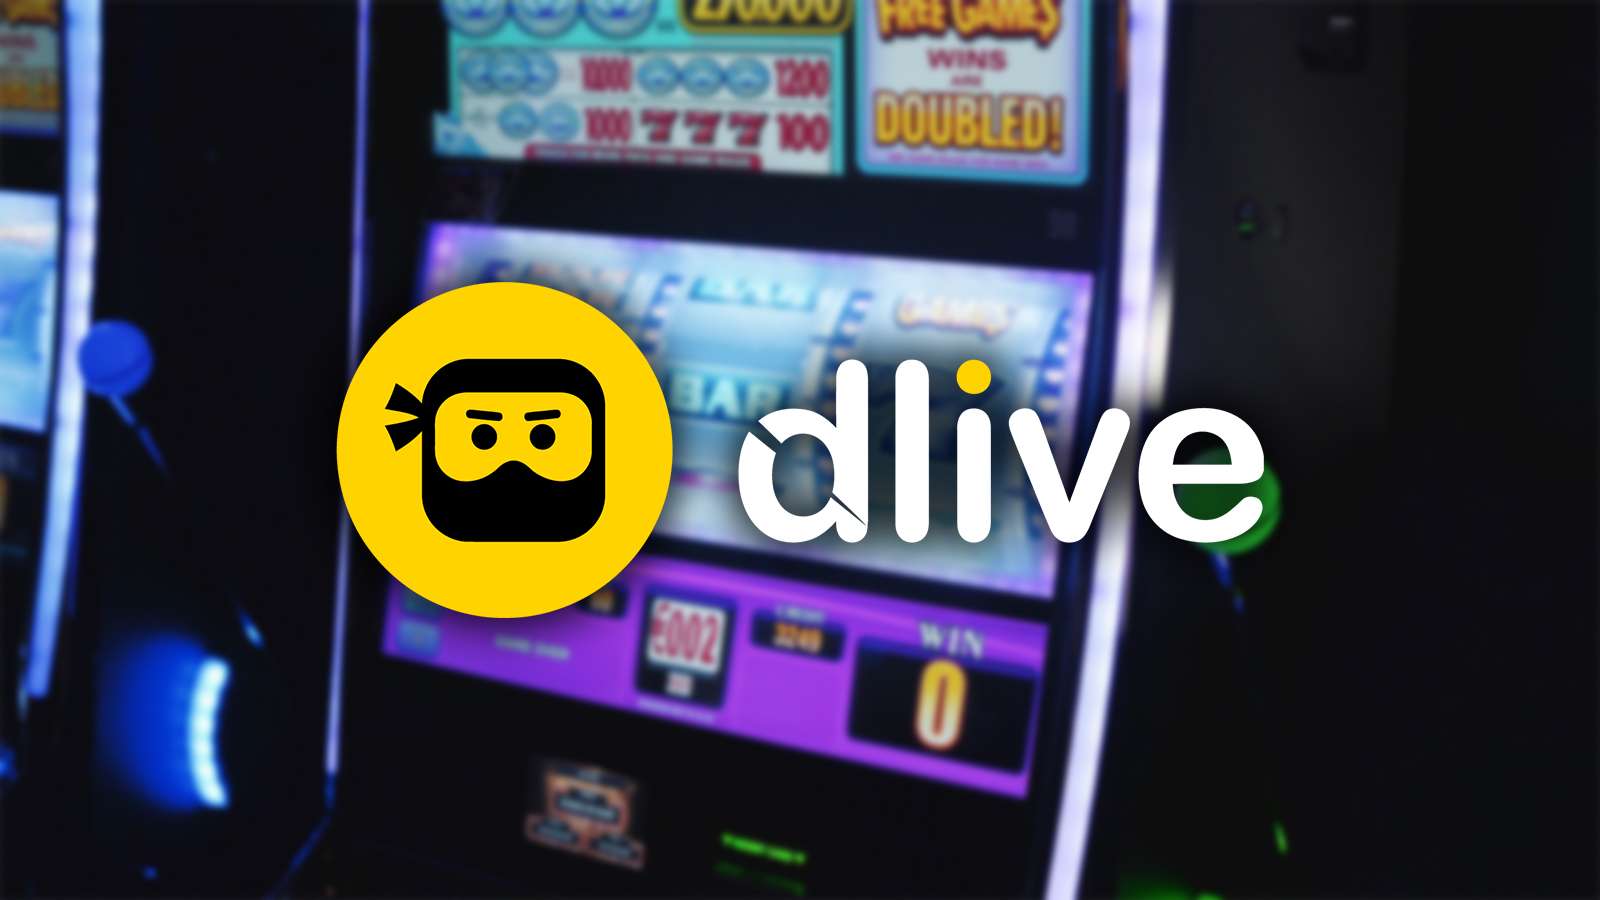 DLive logo in front of slots machine